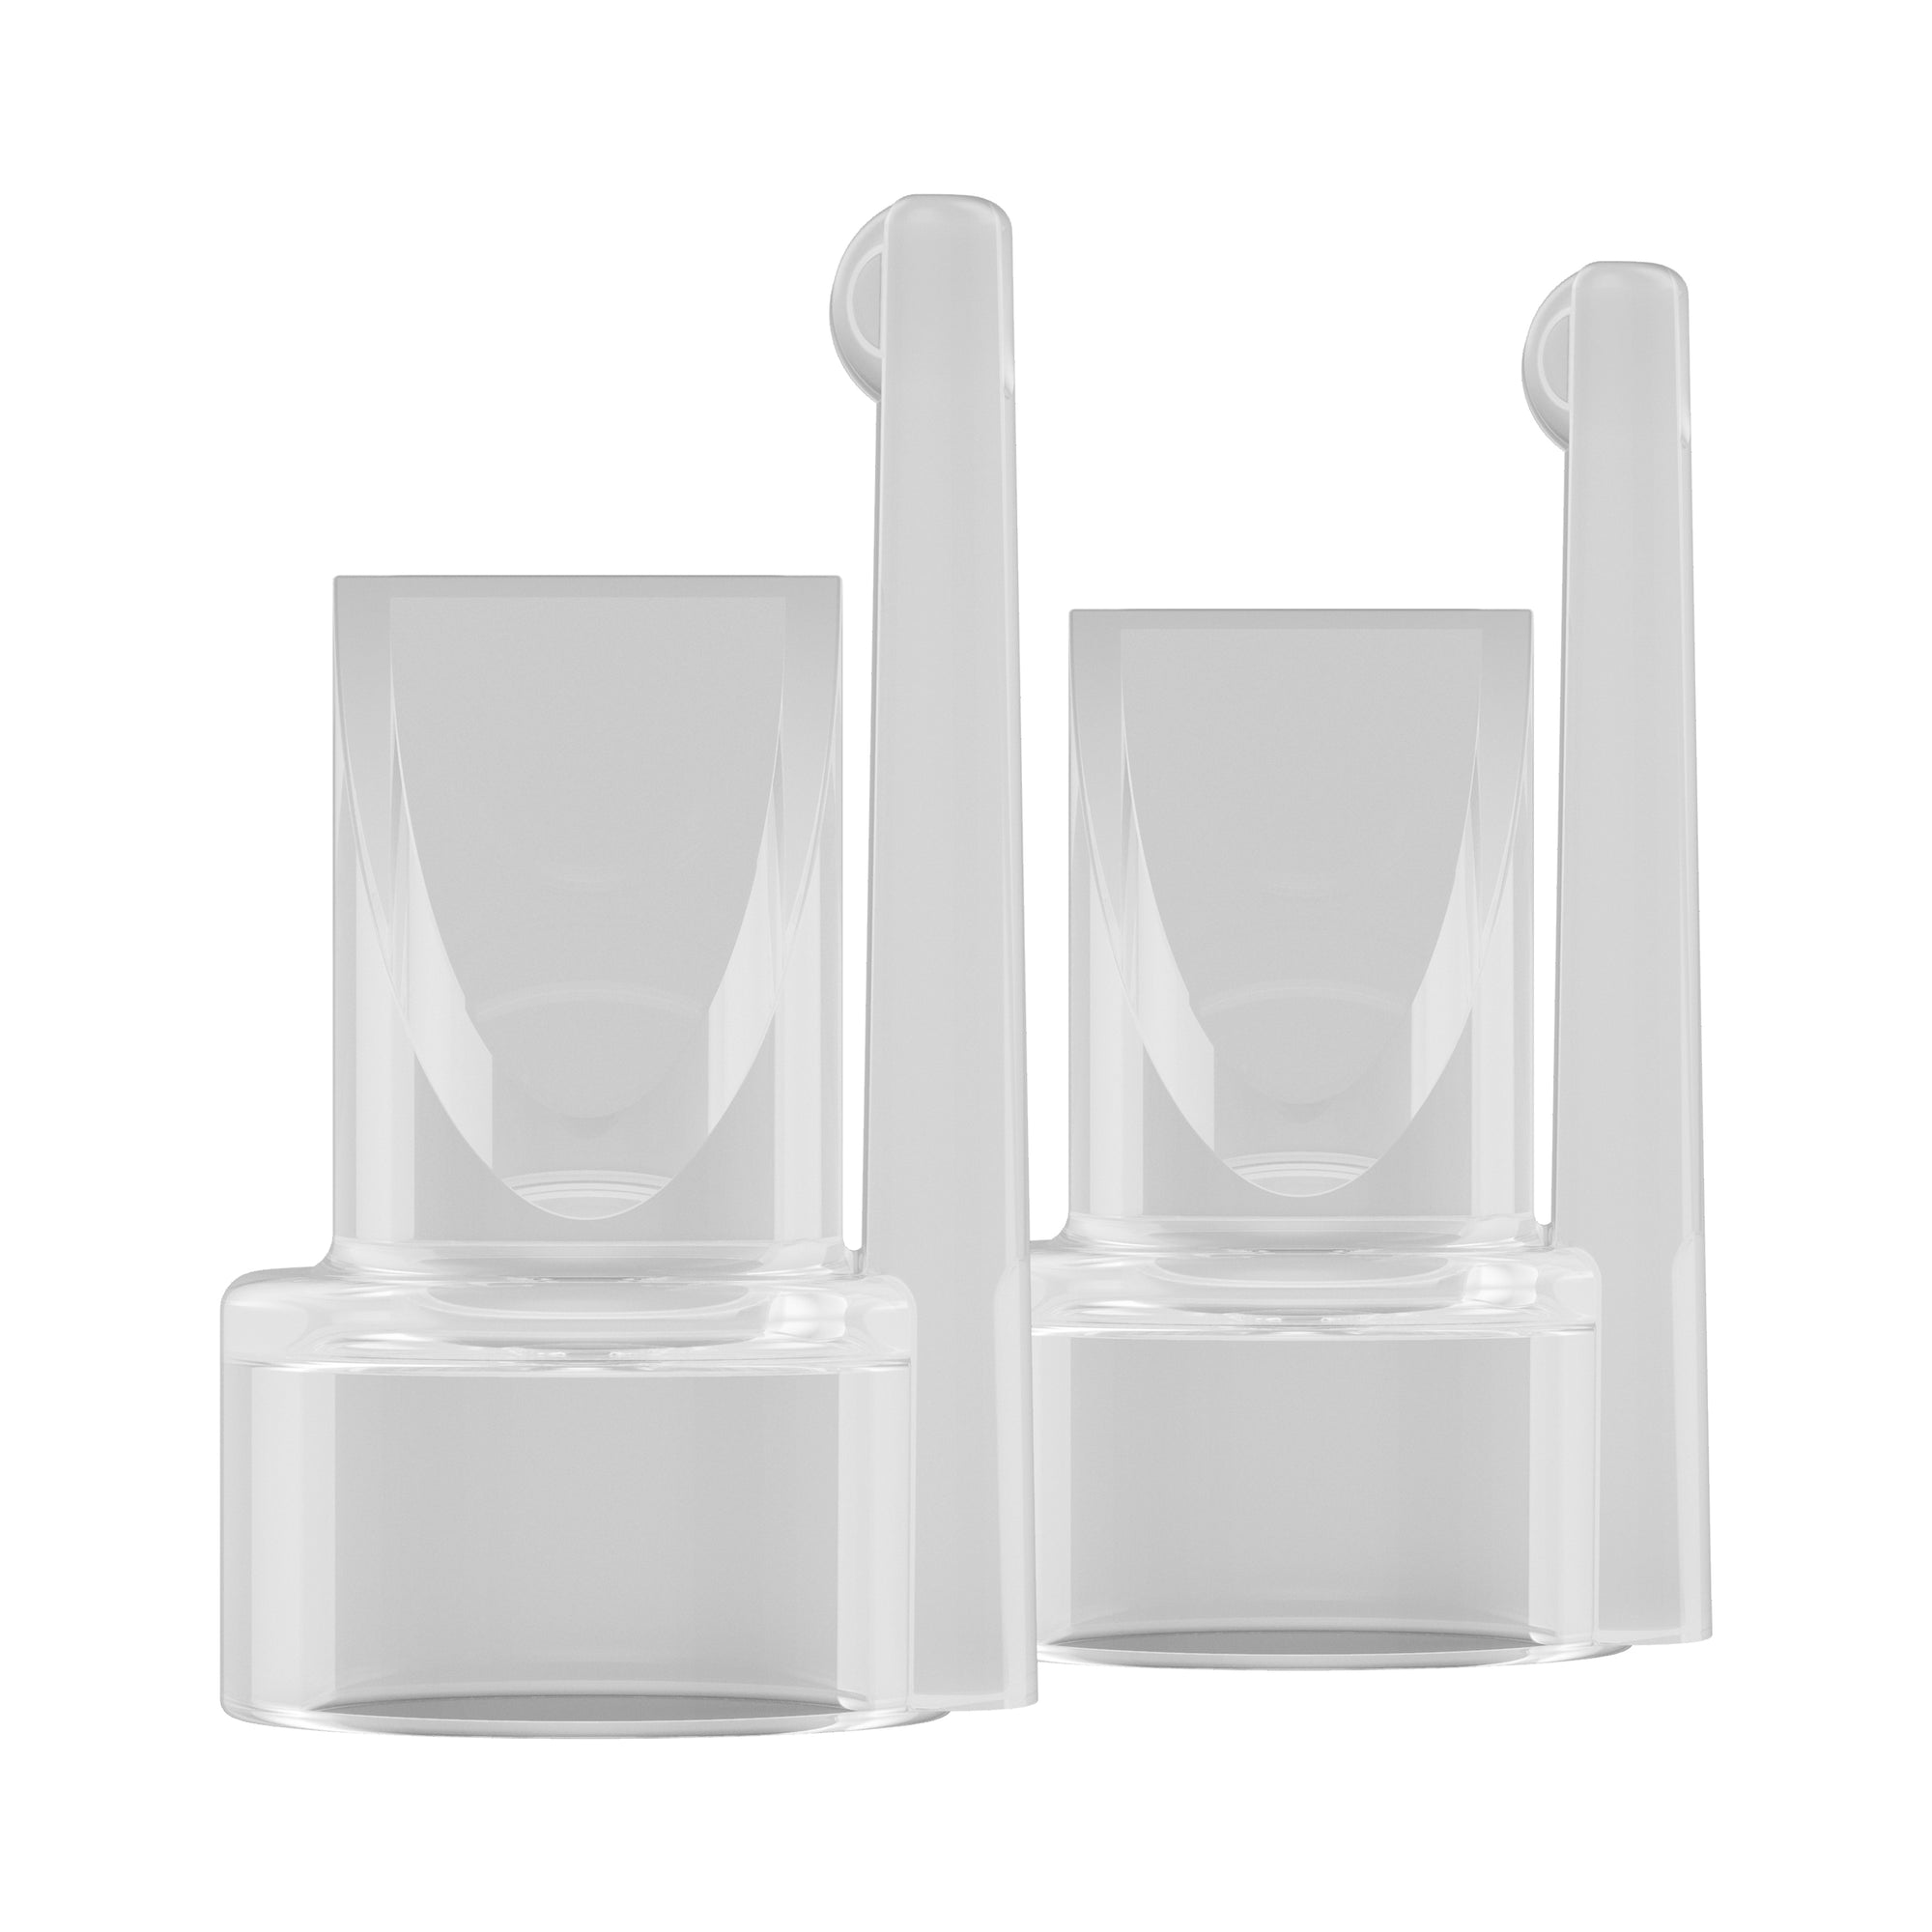 Dr. Brown Breastfeeding Duckbill Valves For Breast Pump (Pack of 2) (3 to 6 Months) White